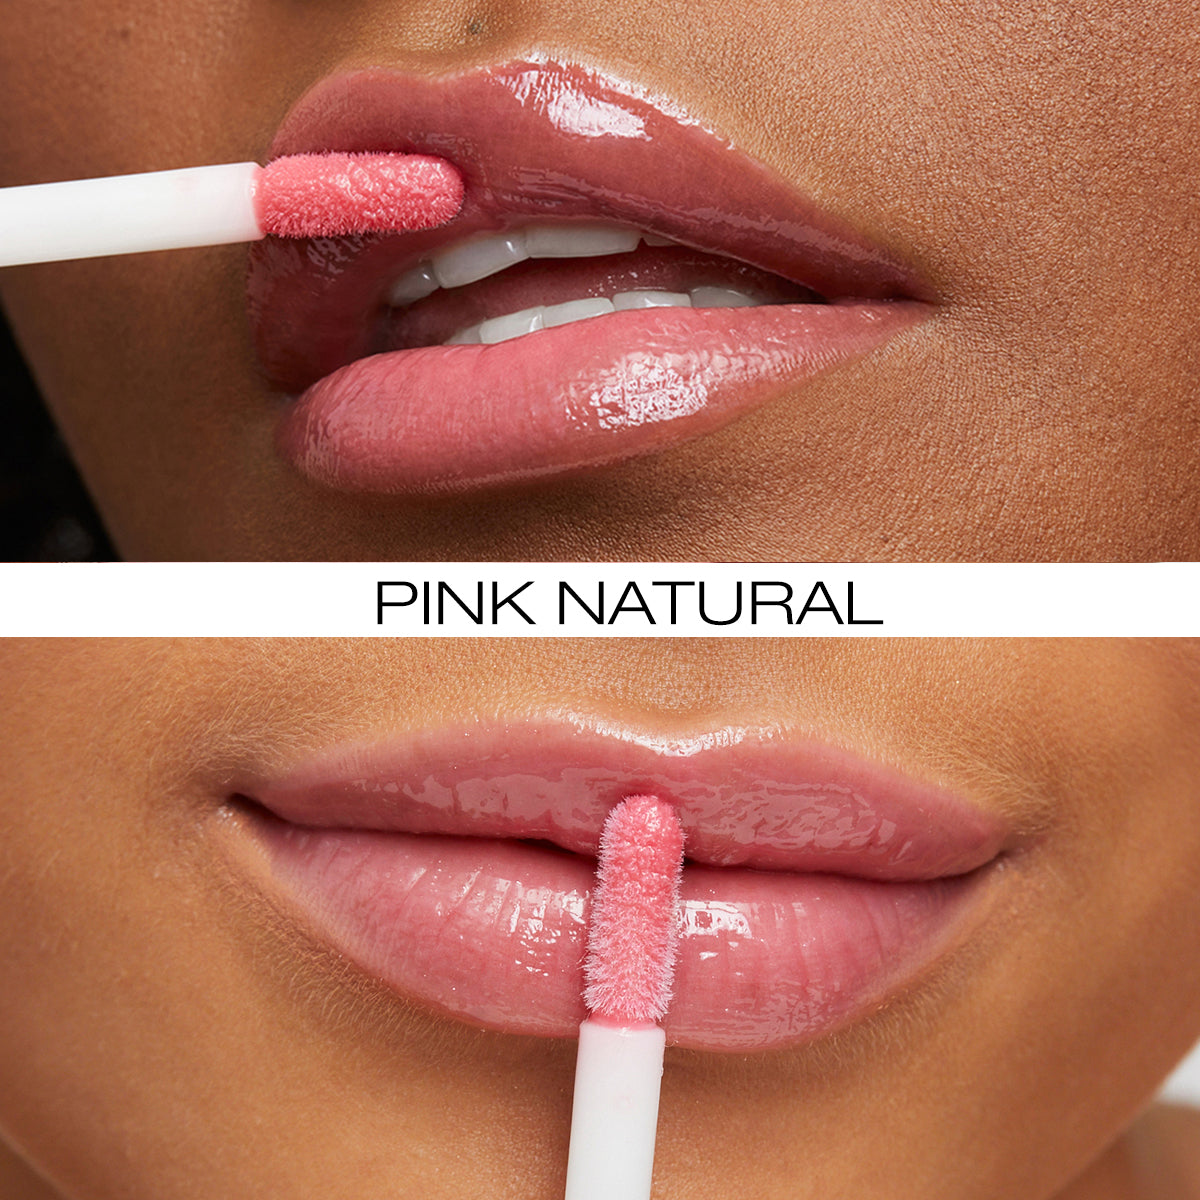 Pink natural mini lip gloss applied to model lips